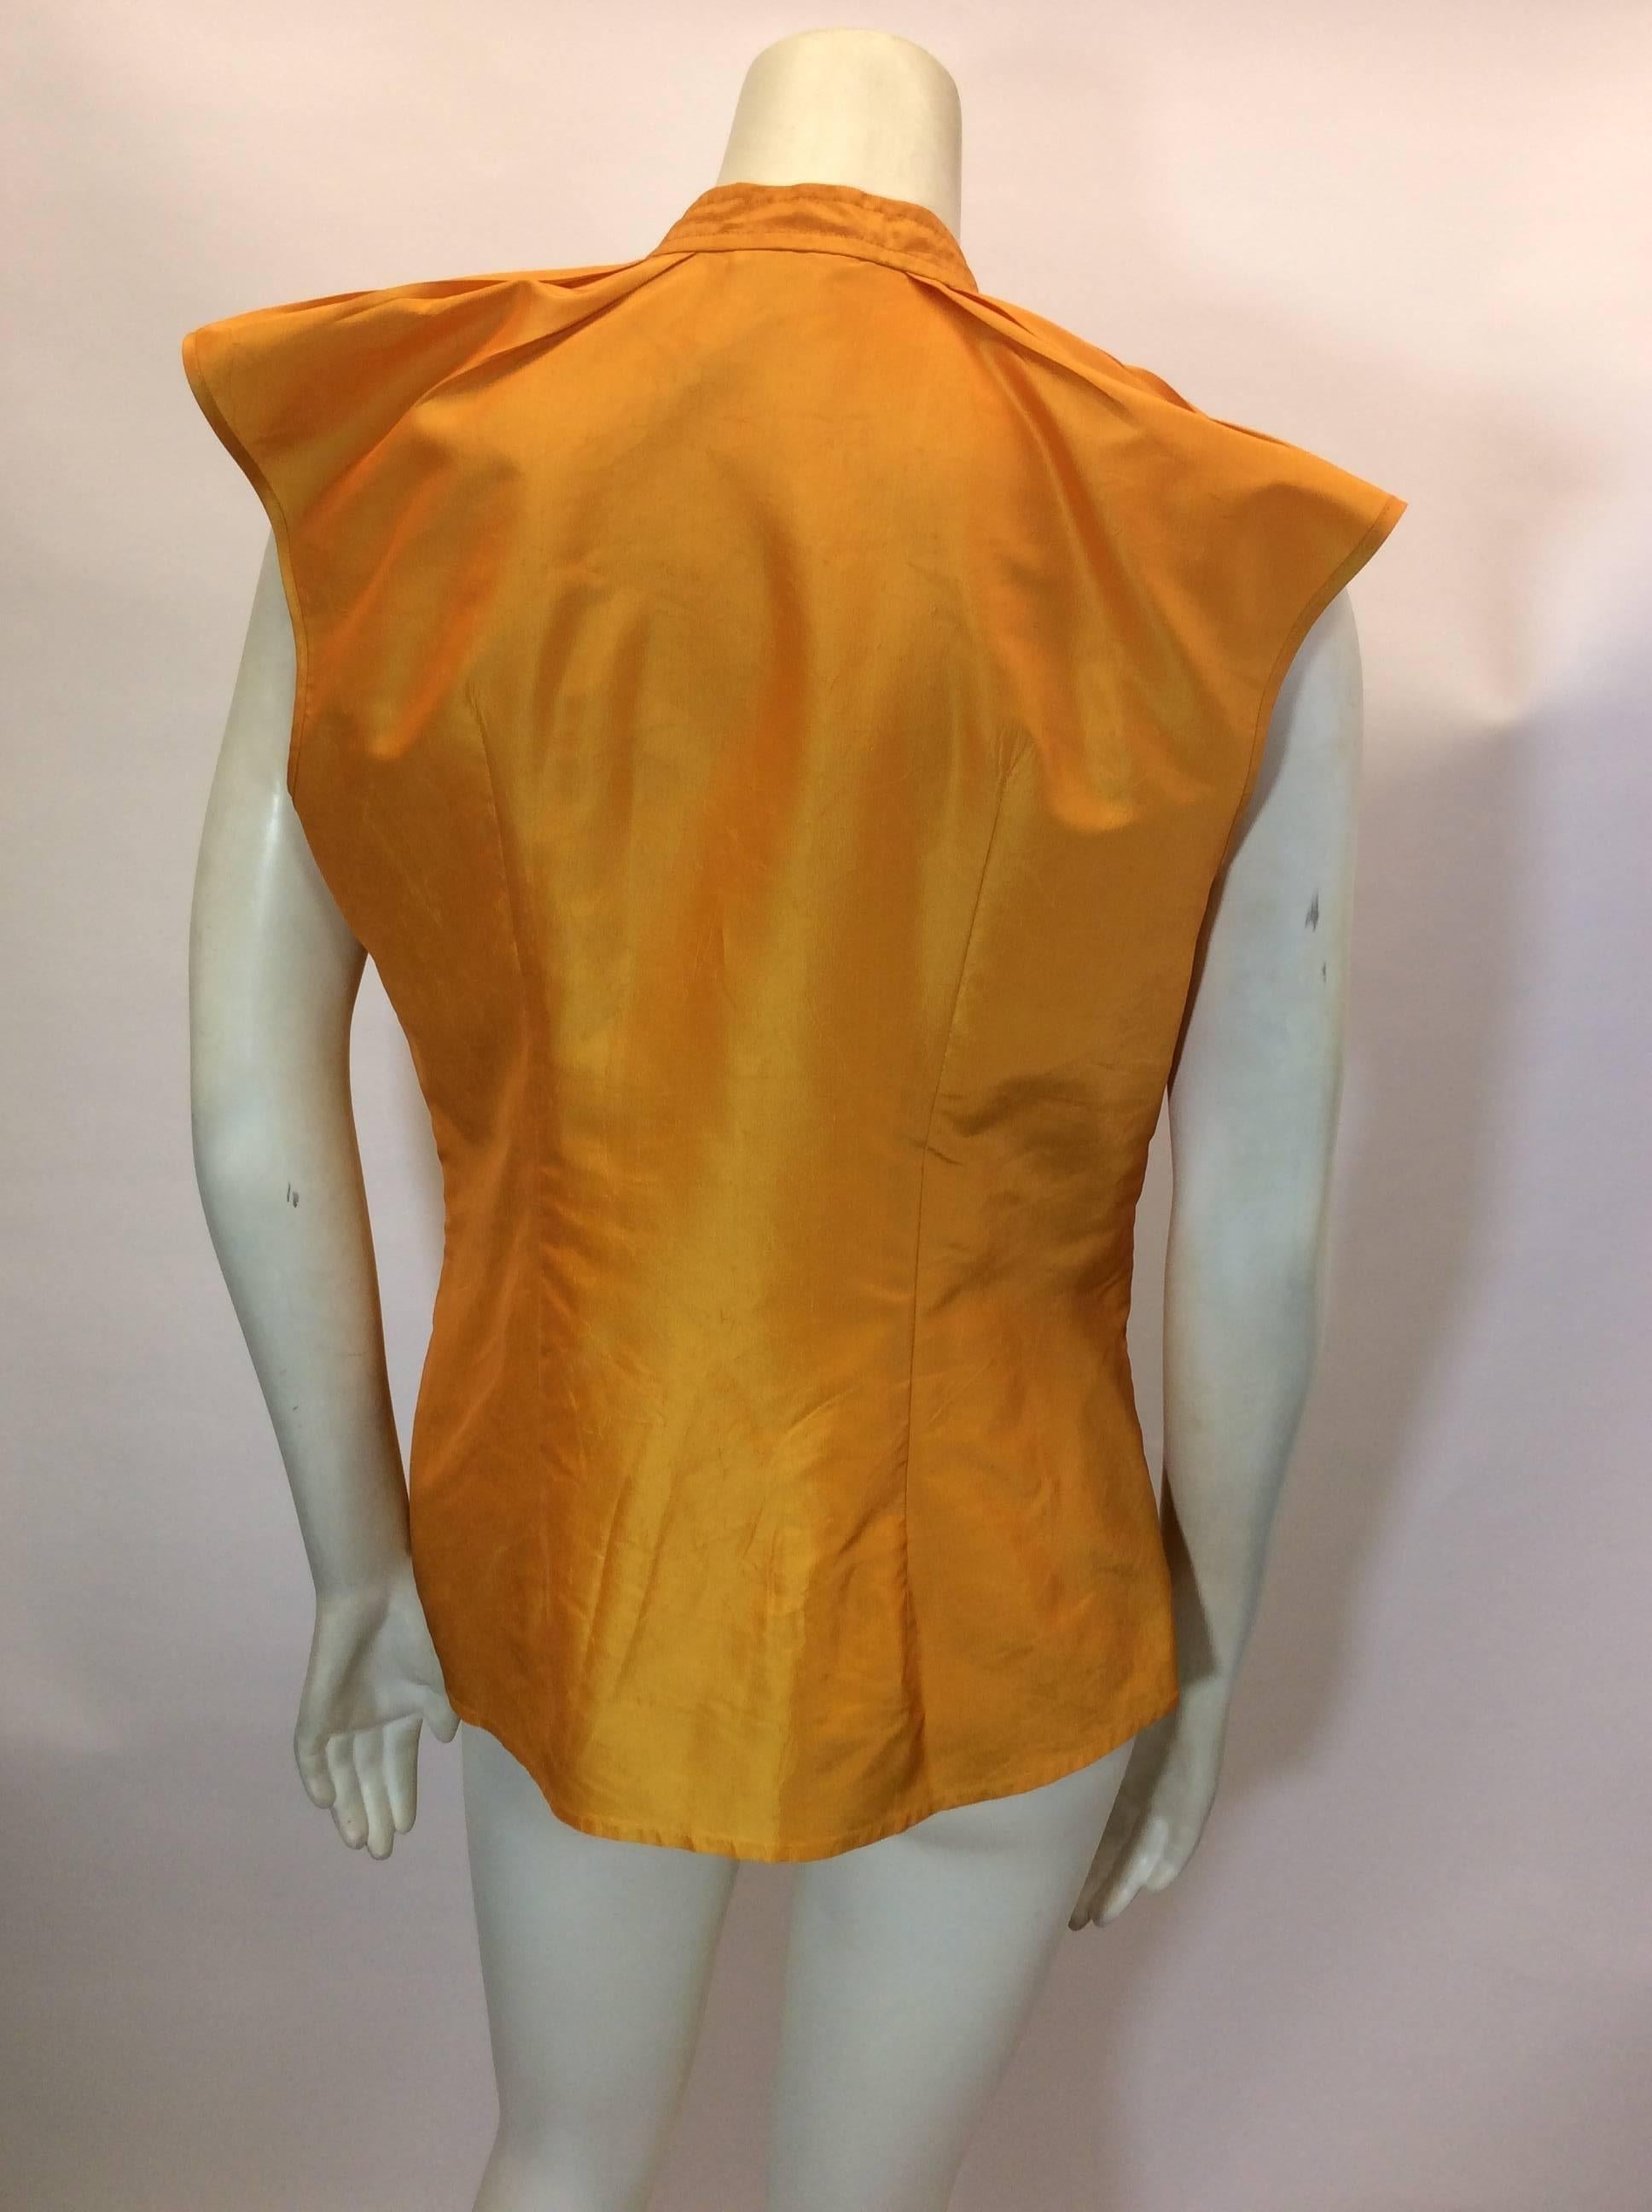 Oscar De La Renta Gold Ruffled Blouse In Excellent Condition For Sale In Narberth, PA